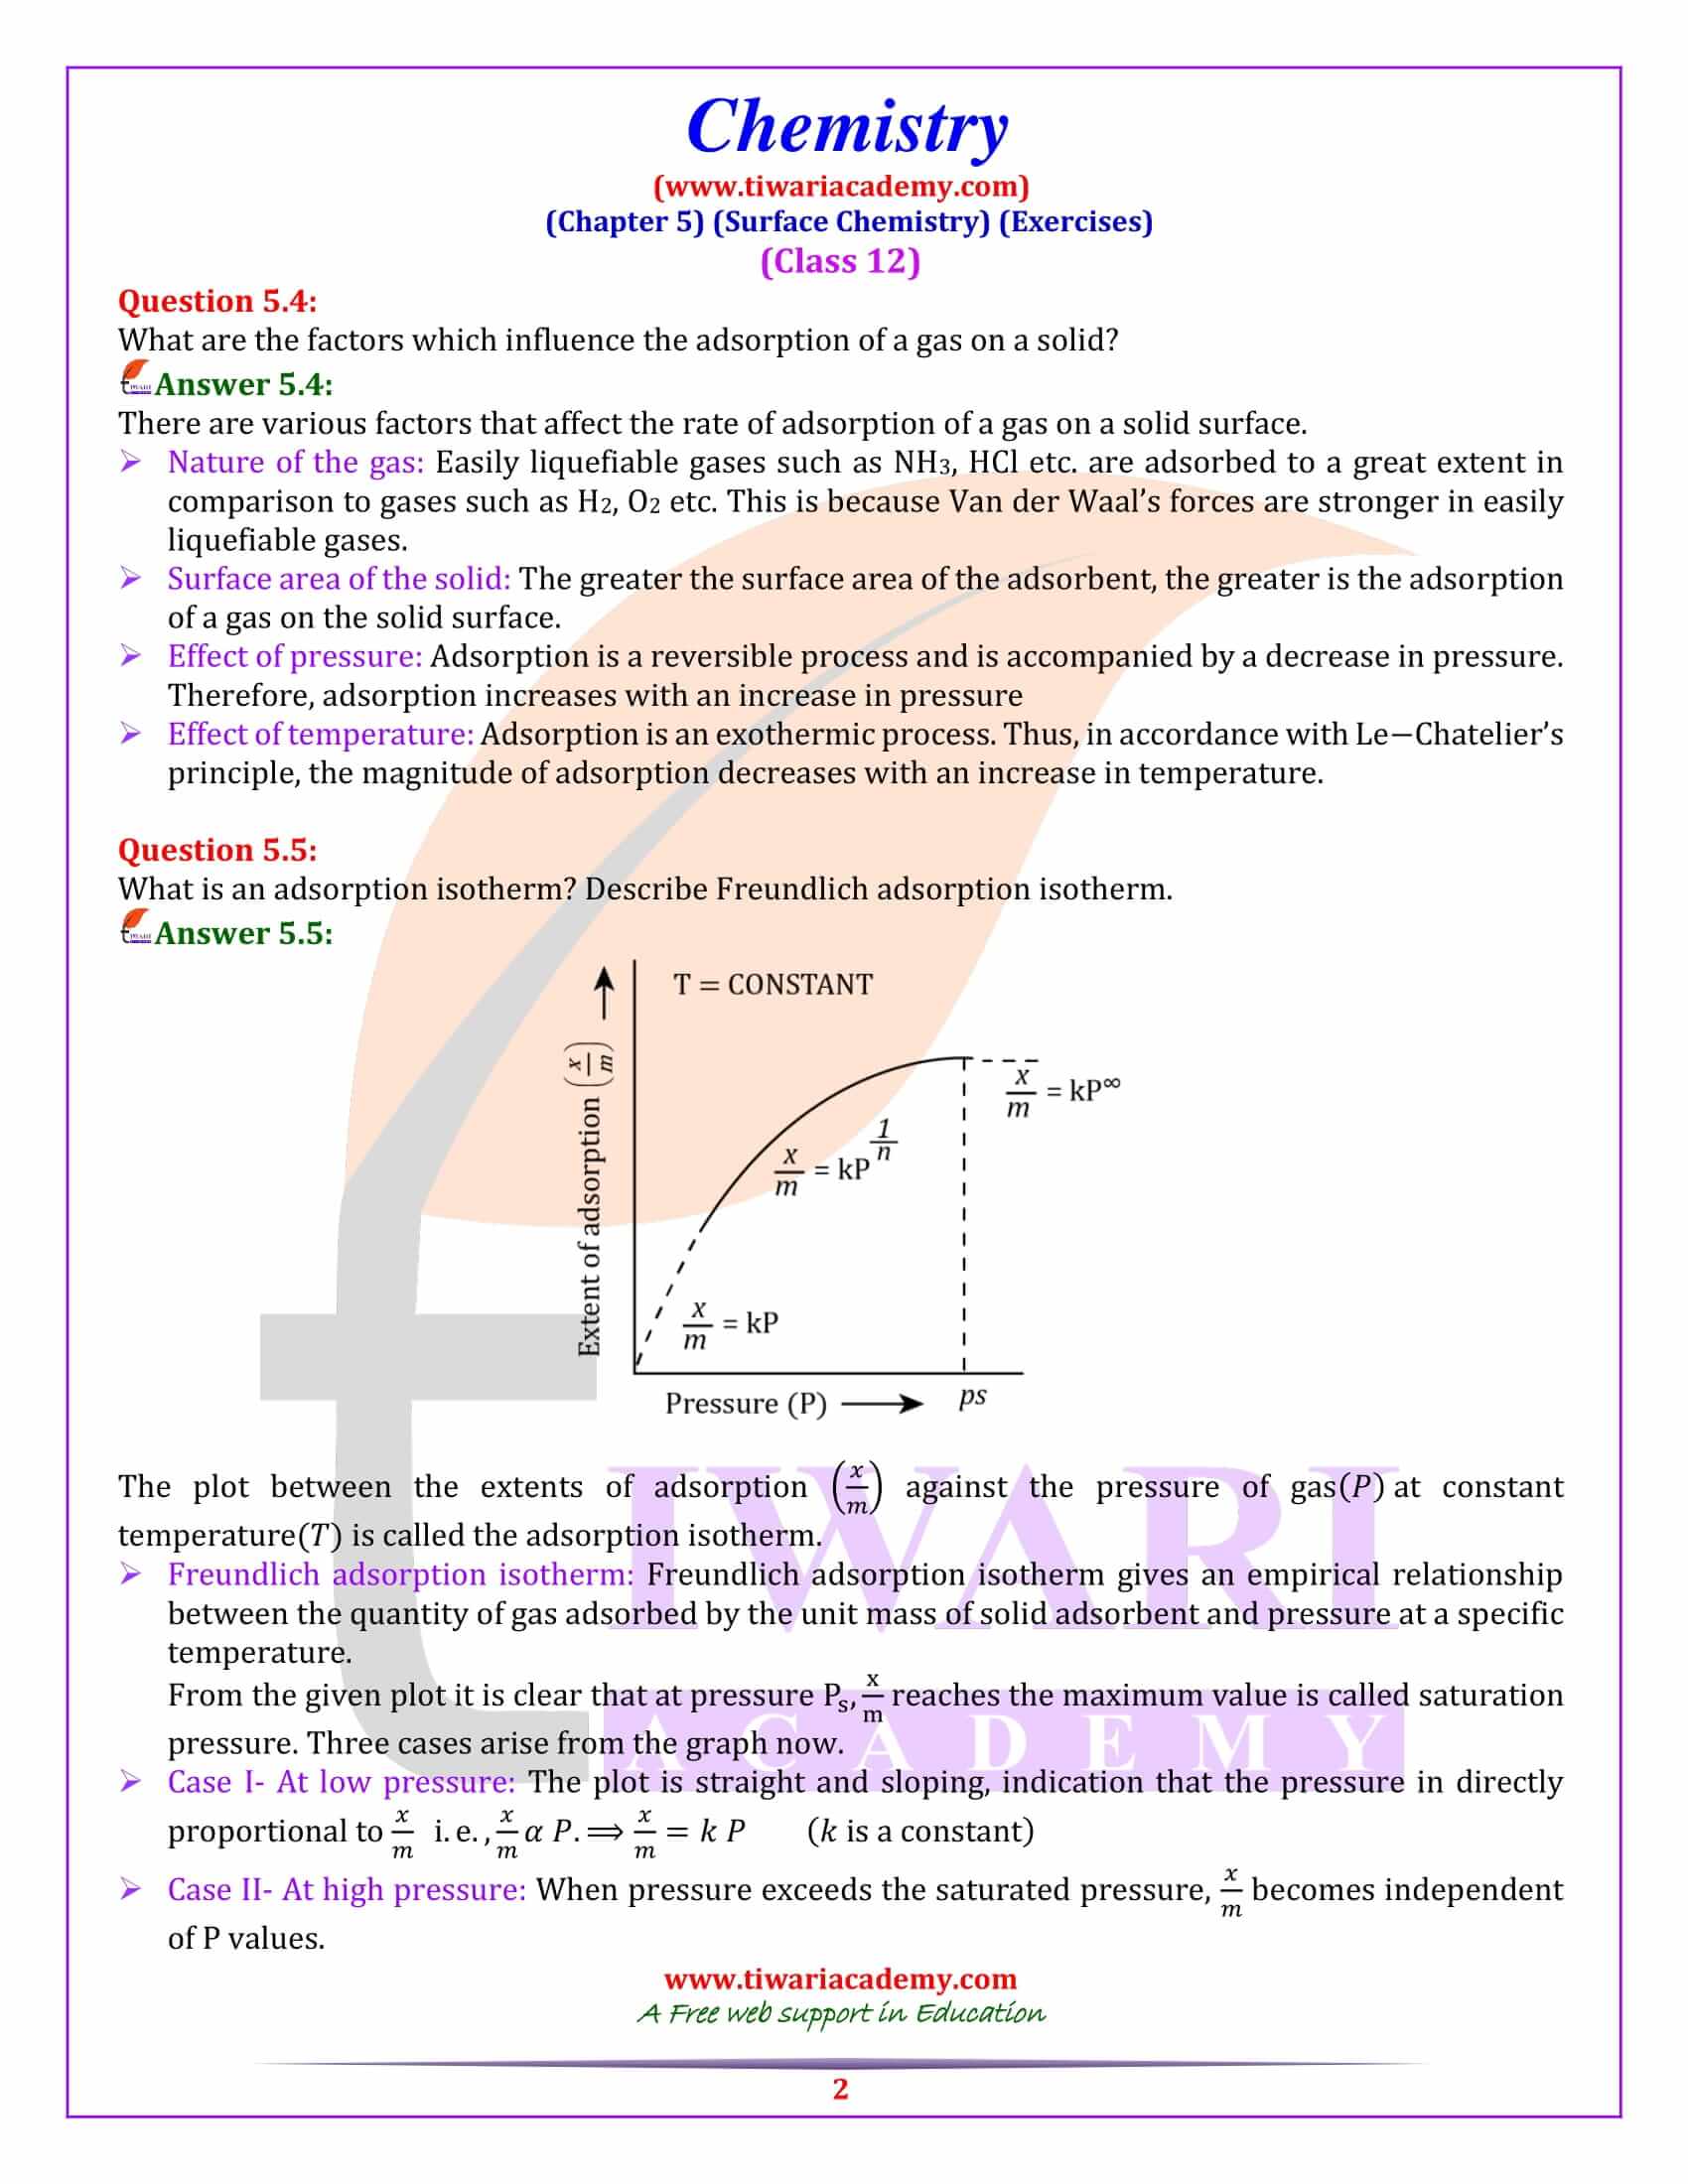 NCERT Solutions for Class 12 Chemistry Chapter 5